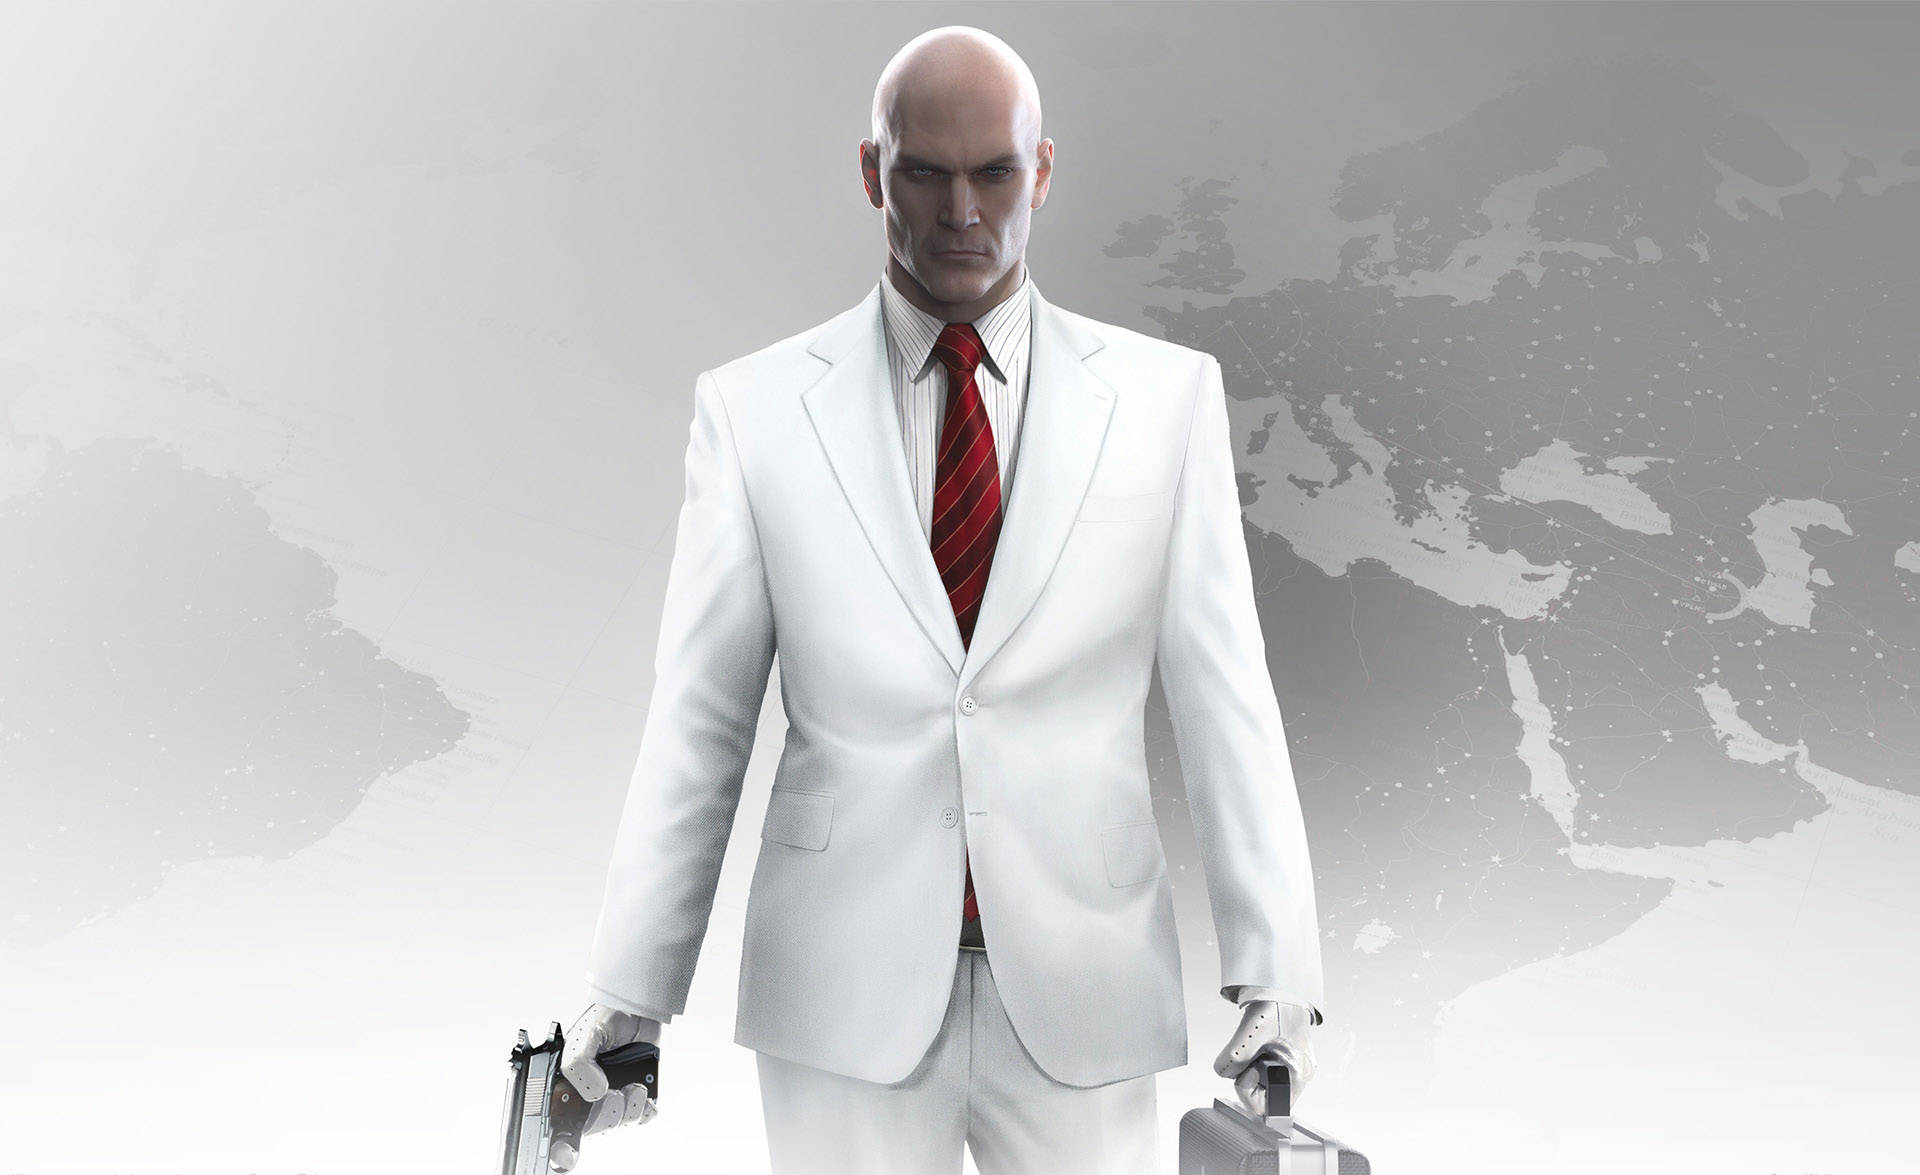 Enter The Shadowy World Of Hitman On Your Iphone Background